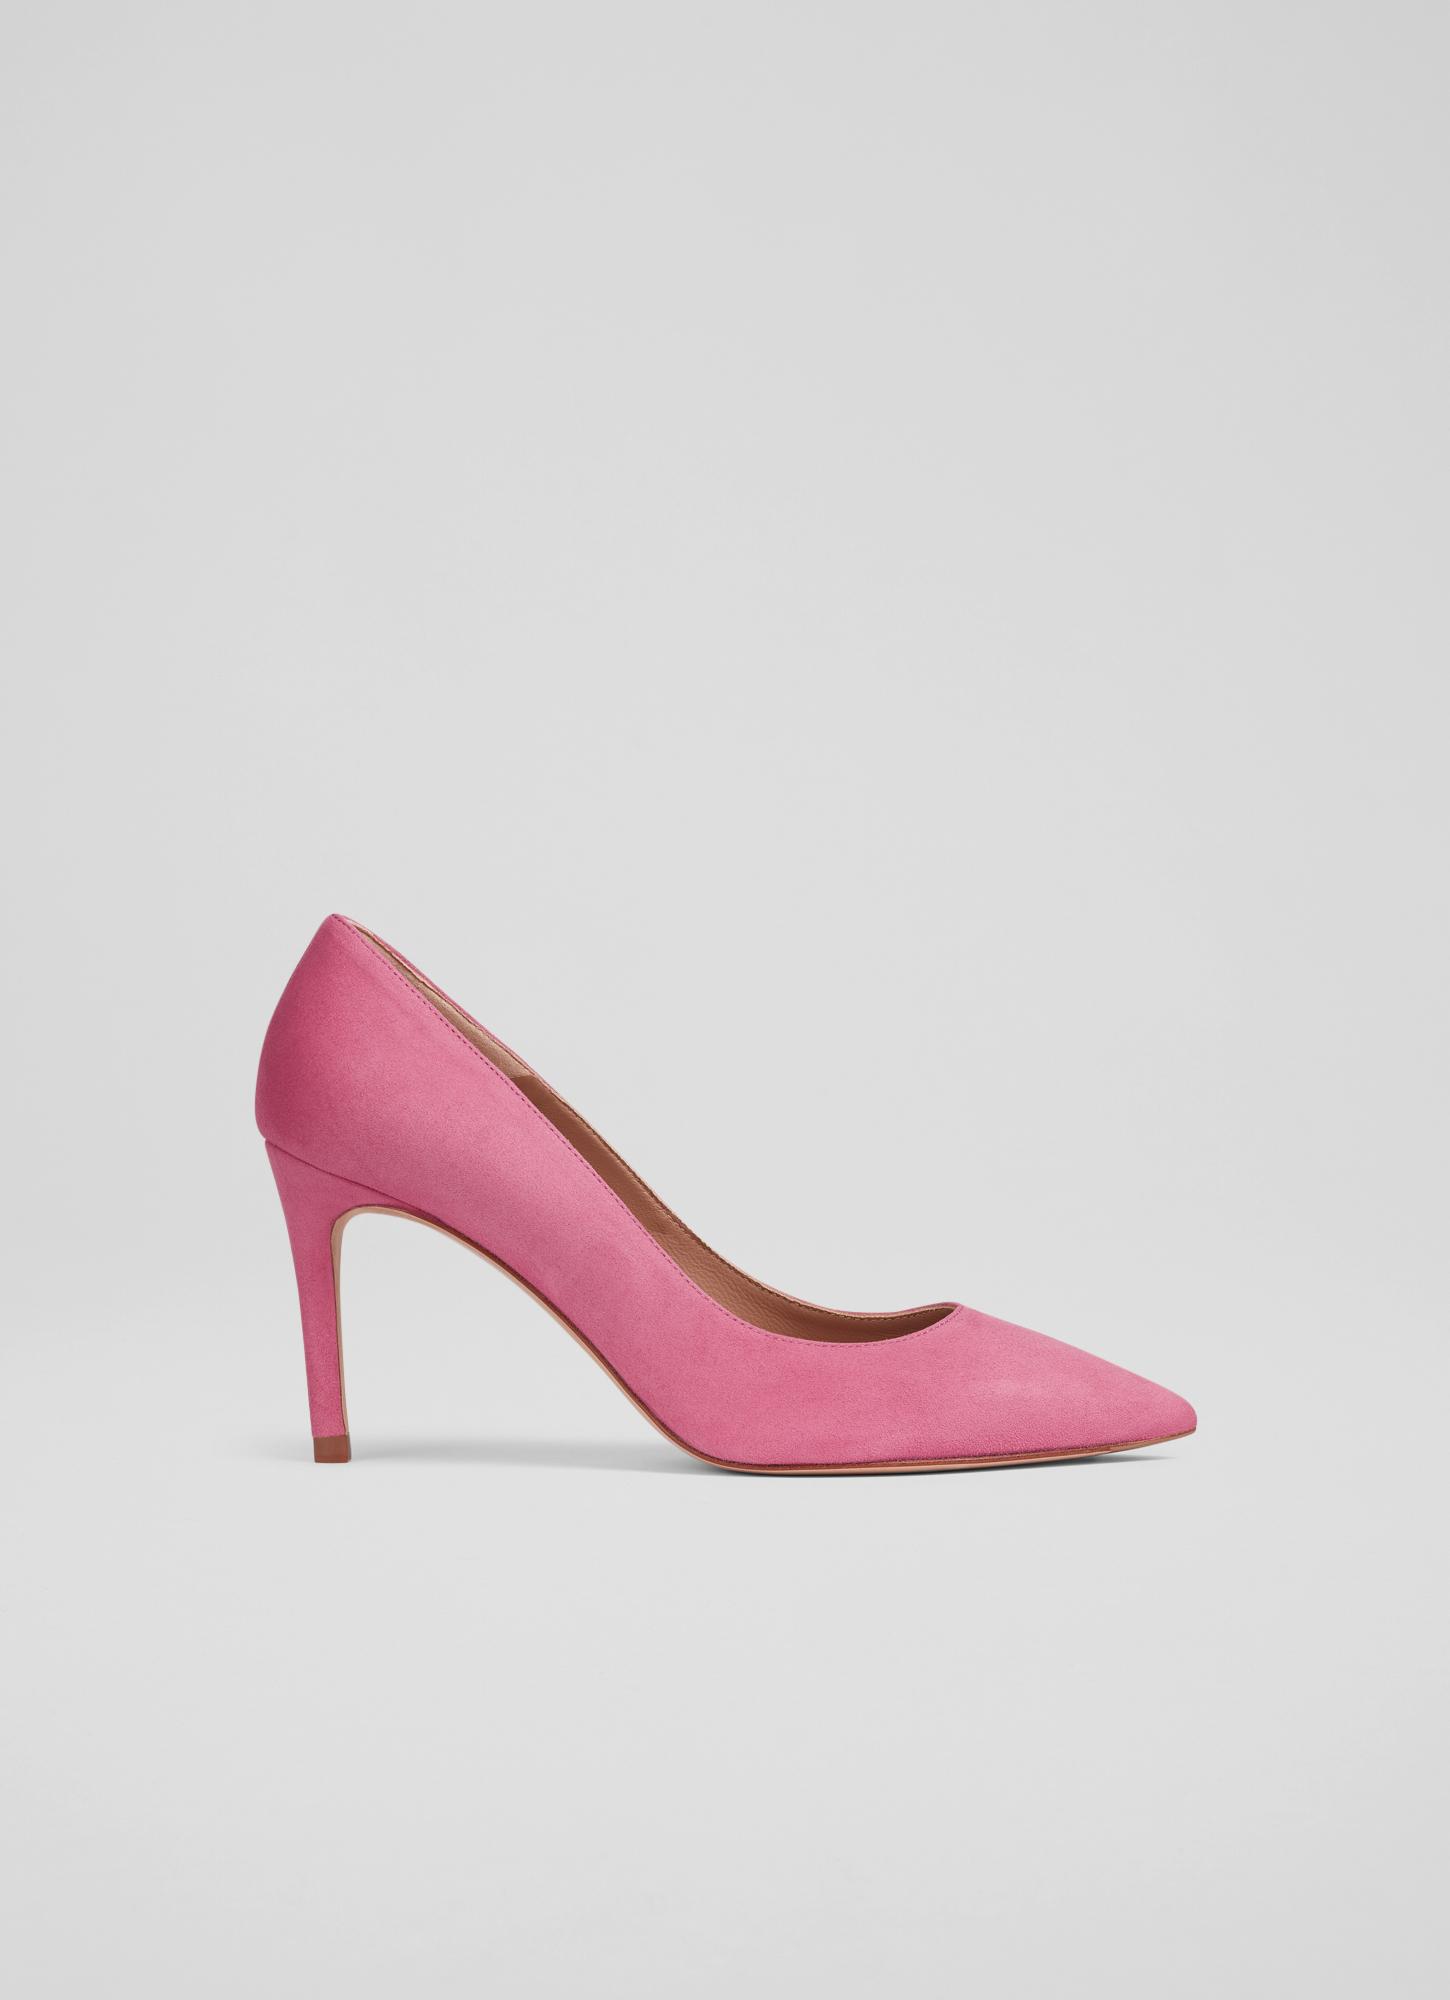 Floret Pink Suede Pointed Toe Courts, Pink